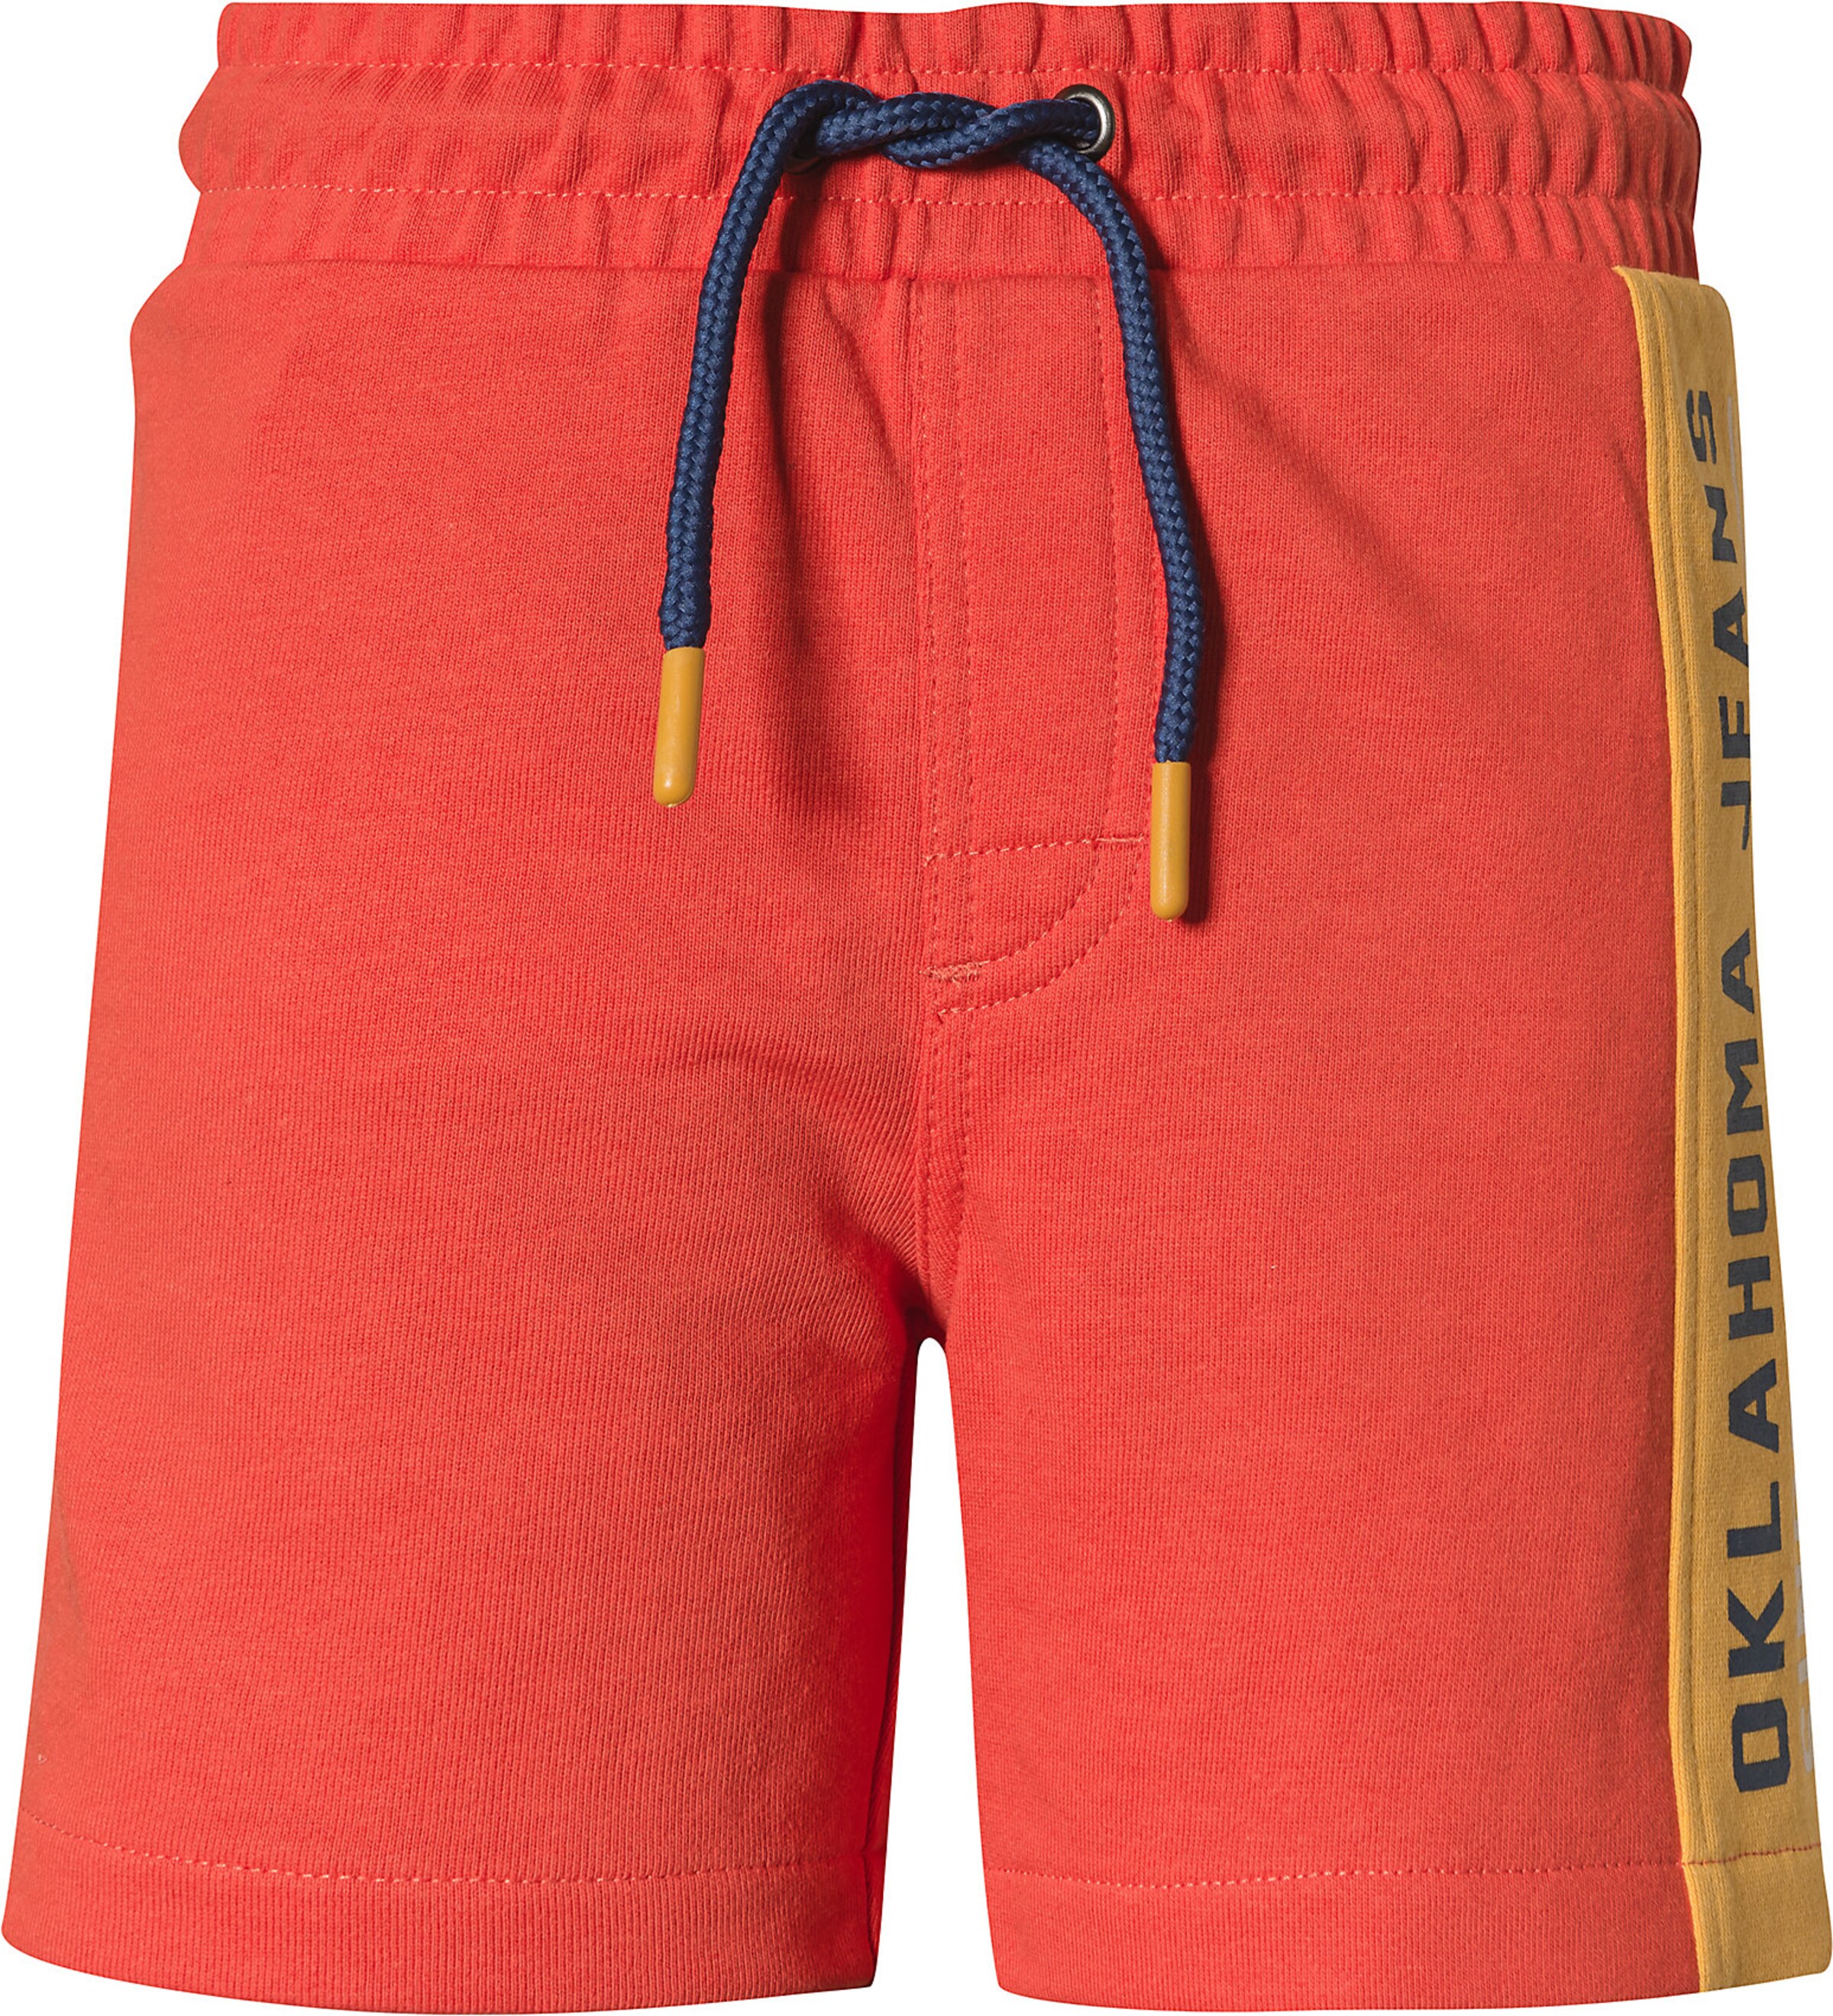 Kinder Teens (Gr. 140-176) myToys-COLLECTION Shorts in Hellrot - FT60829